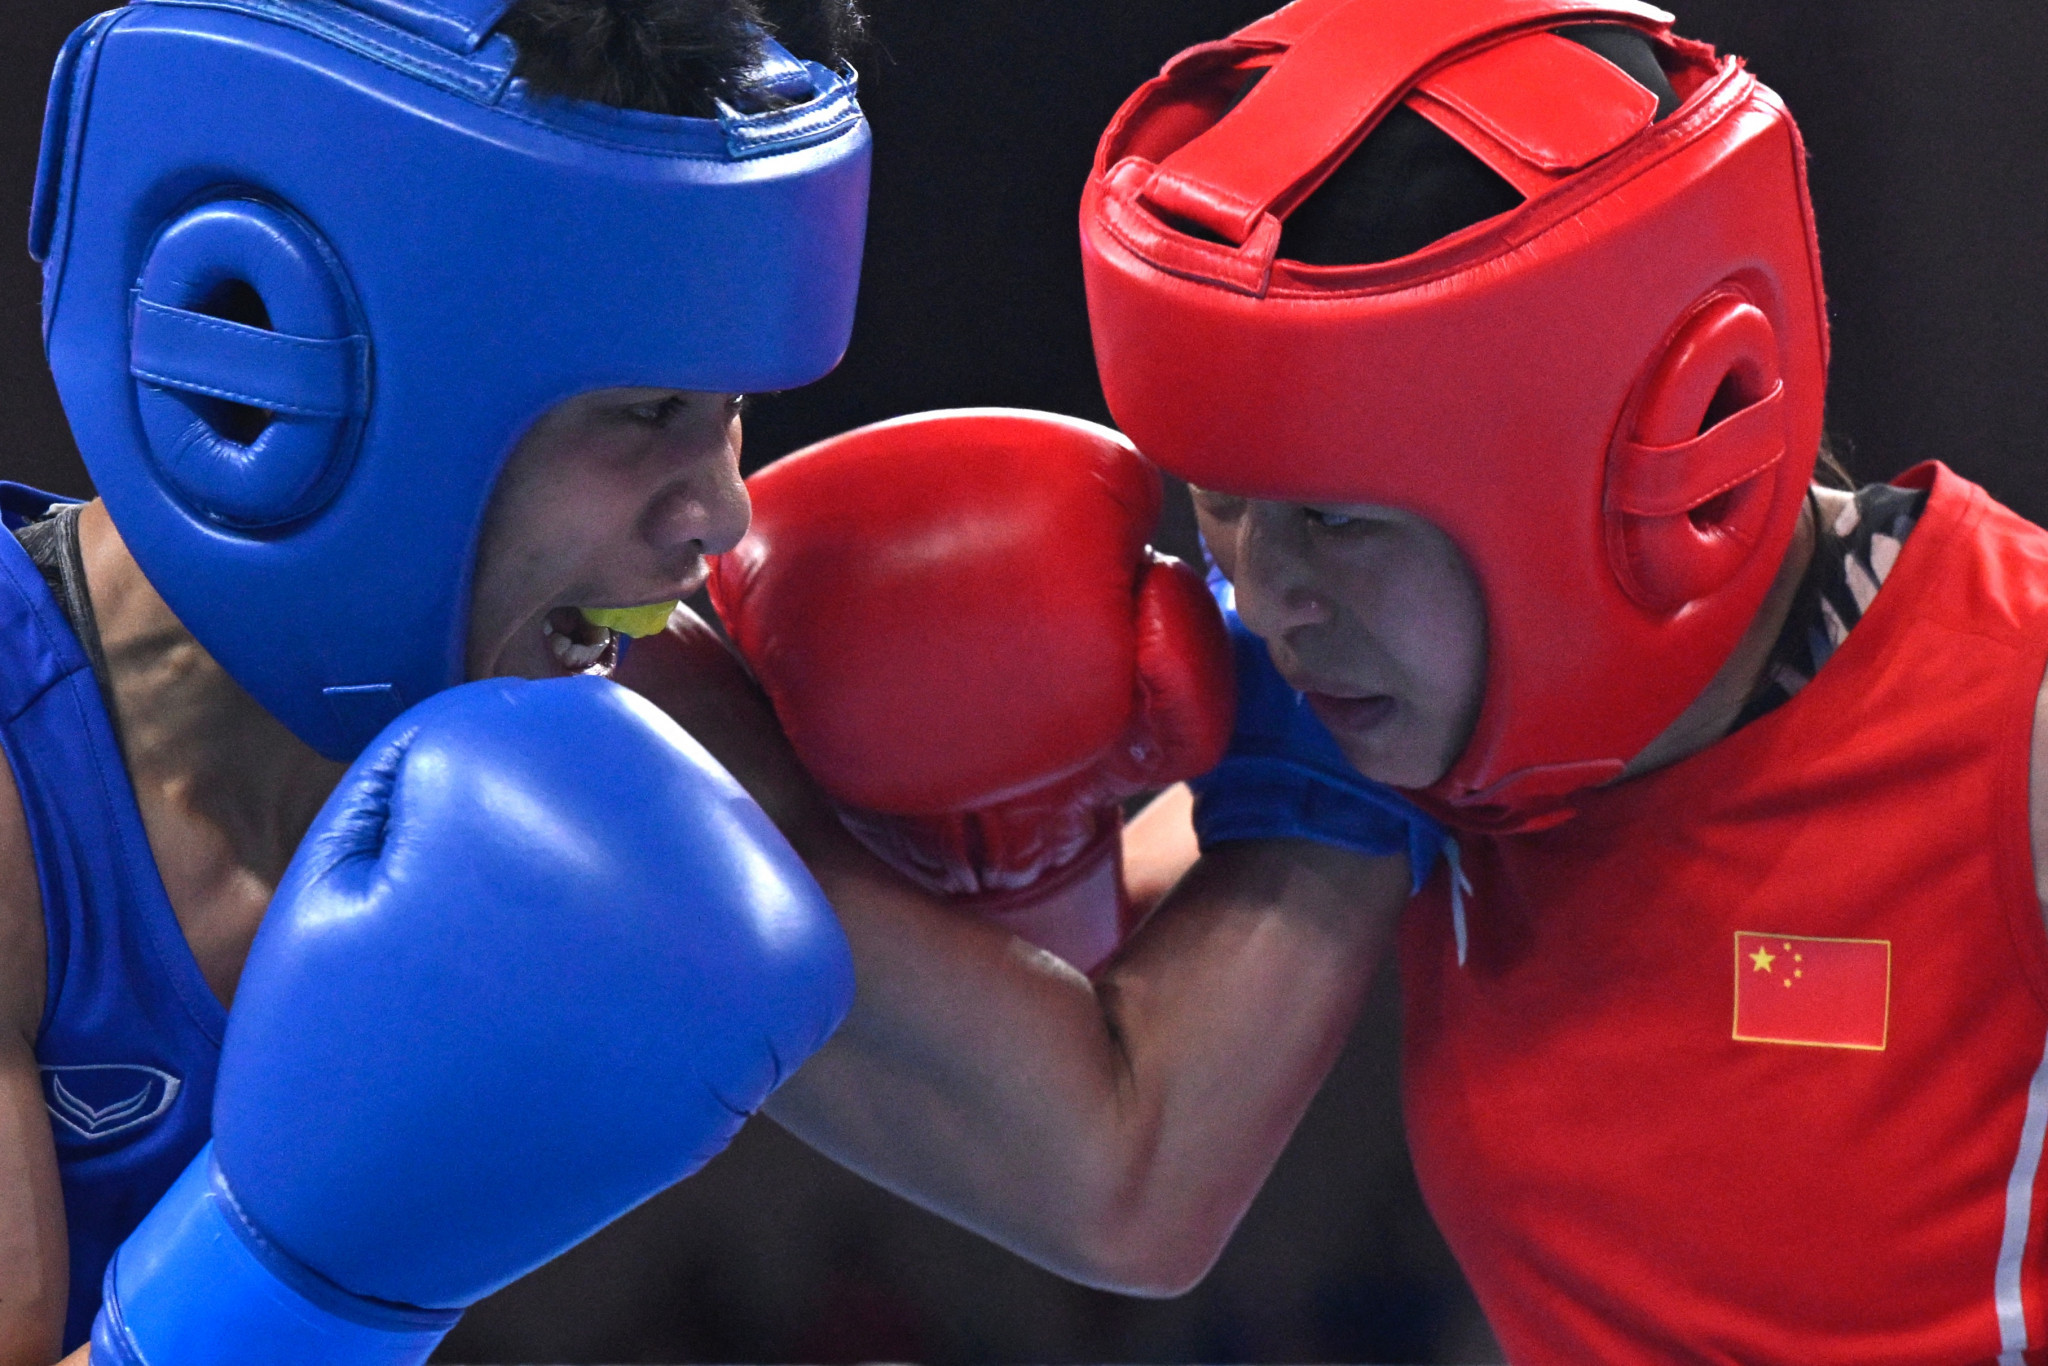 Wu Yu, right, defeated Thailand's double world medallist Chuthamat Raksat, left, in the women's under-50kg final for the first boxing gold of the Games ©Getty Images